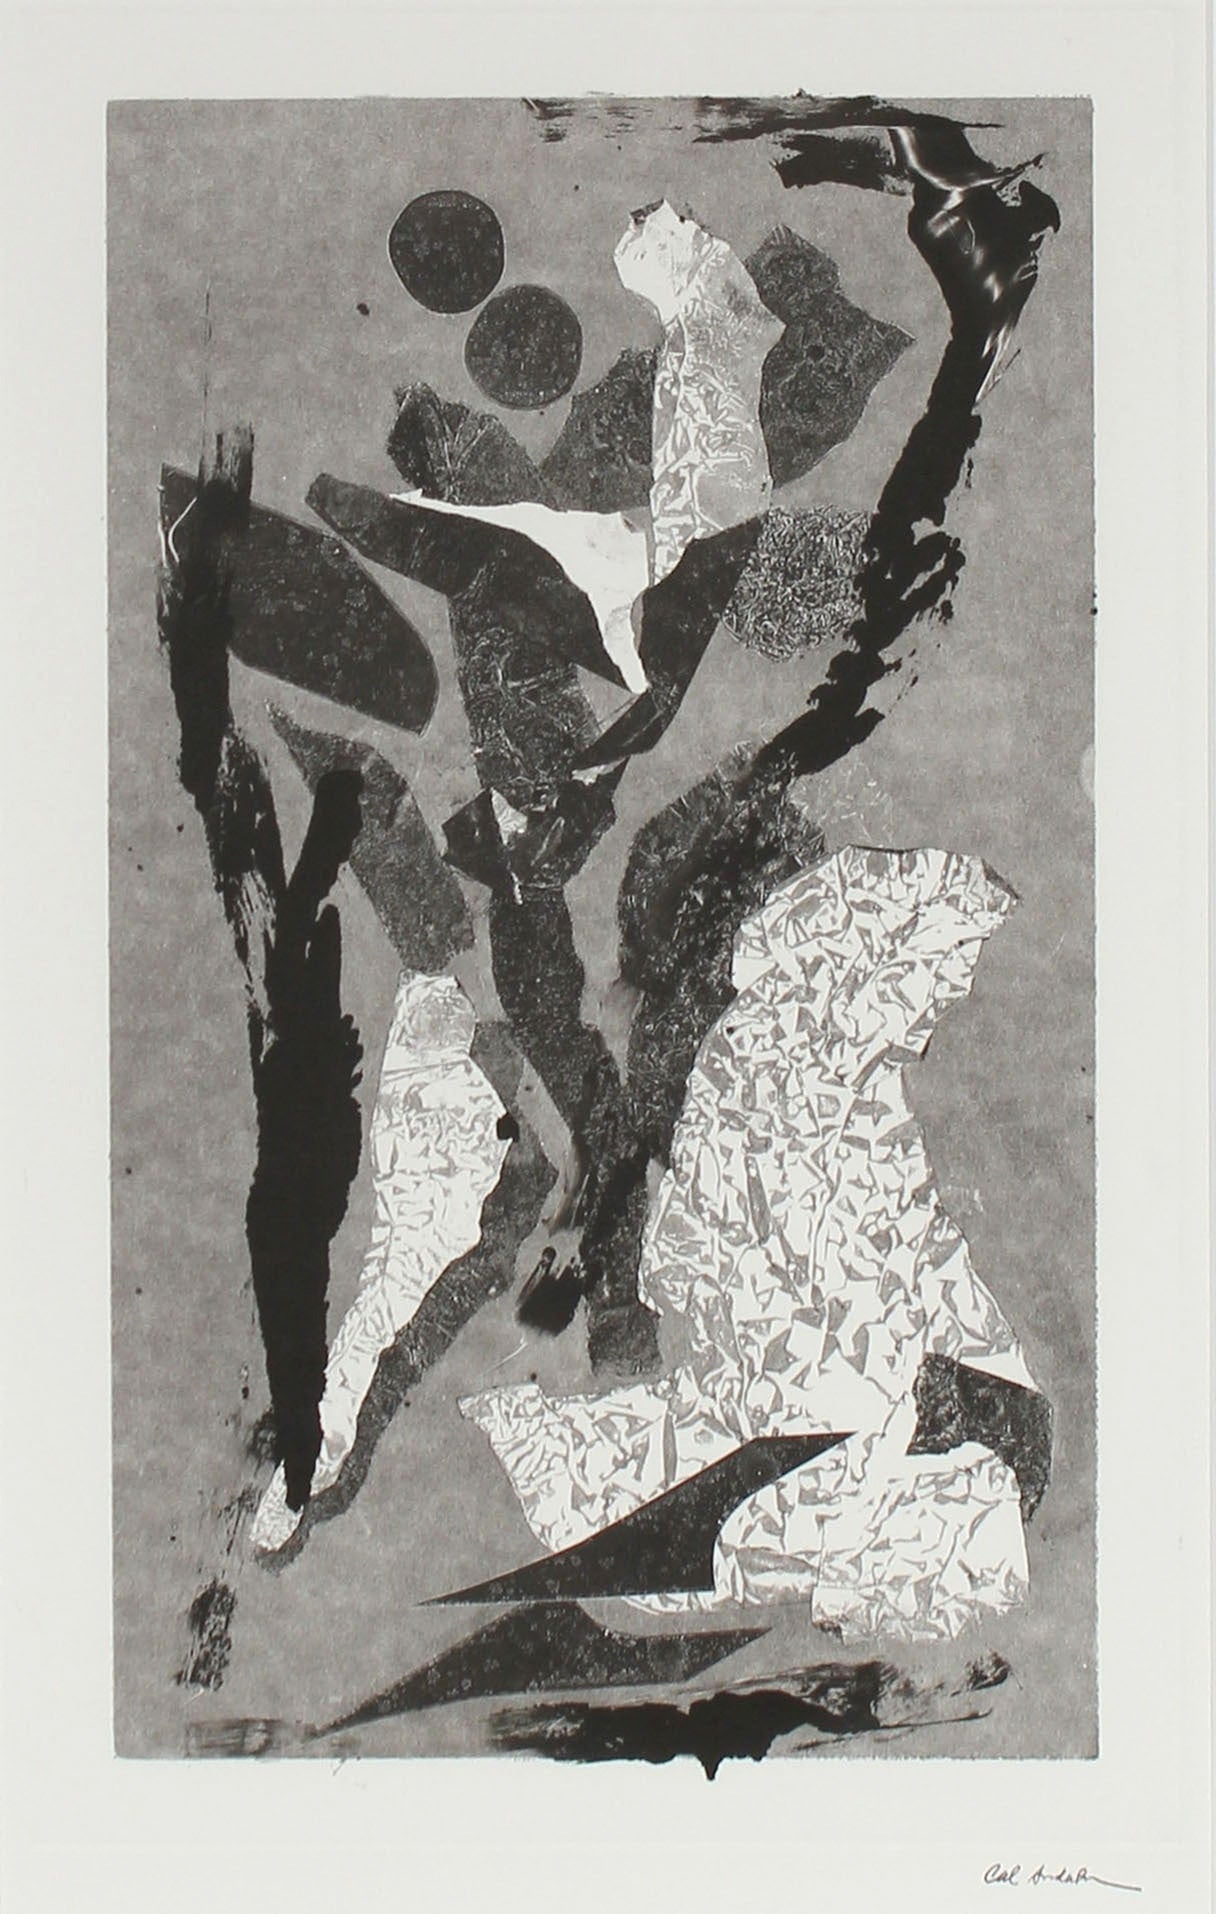 Modernist Abstracted Figures <br>1990-2000s Monotype <br><br>#99304